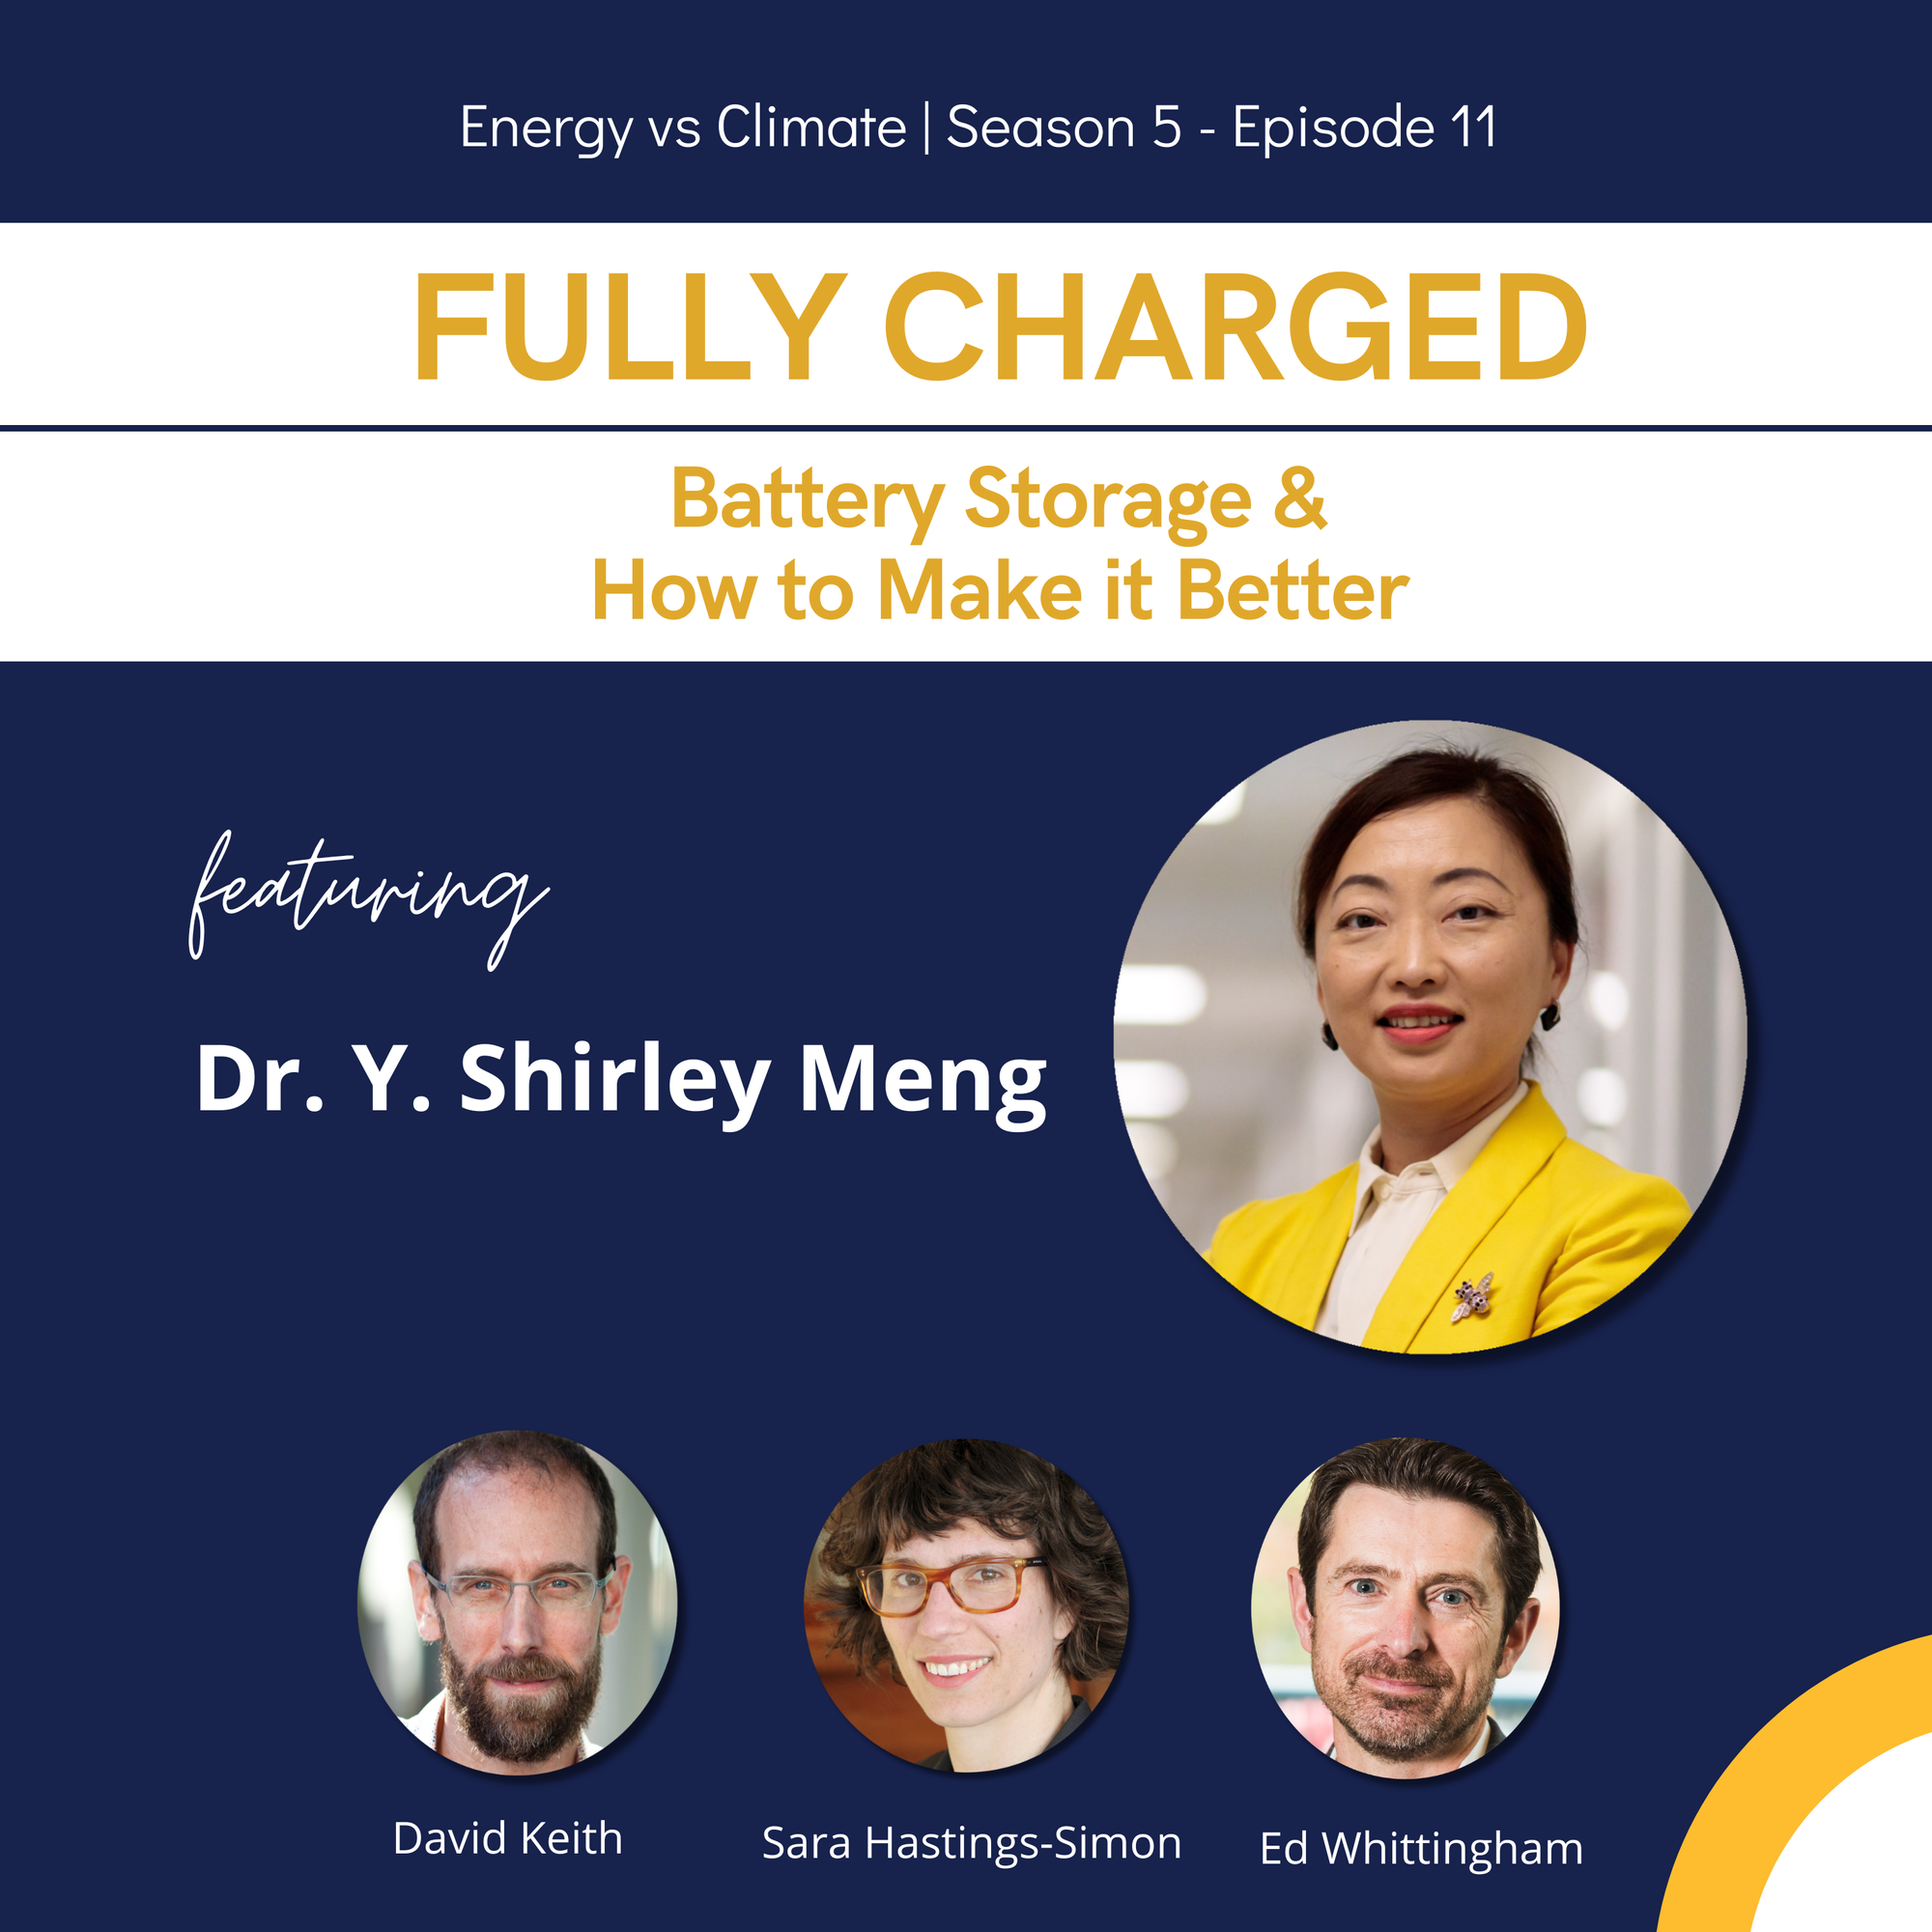 New Episode: FULLY CHARGED